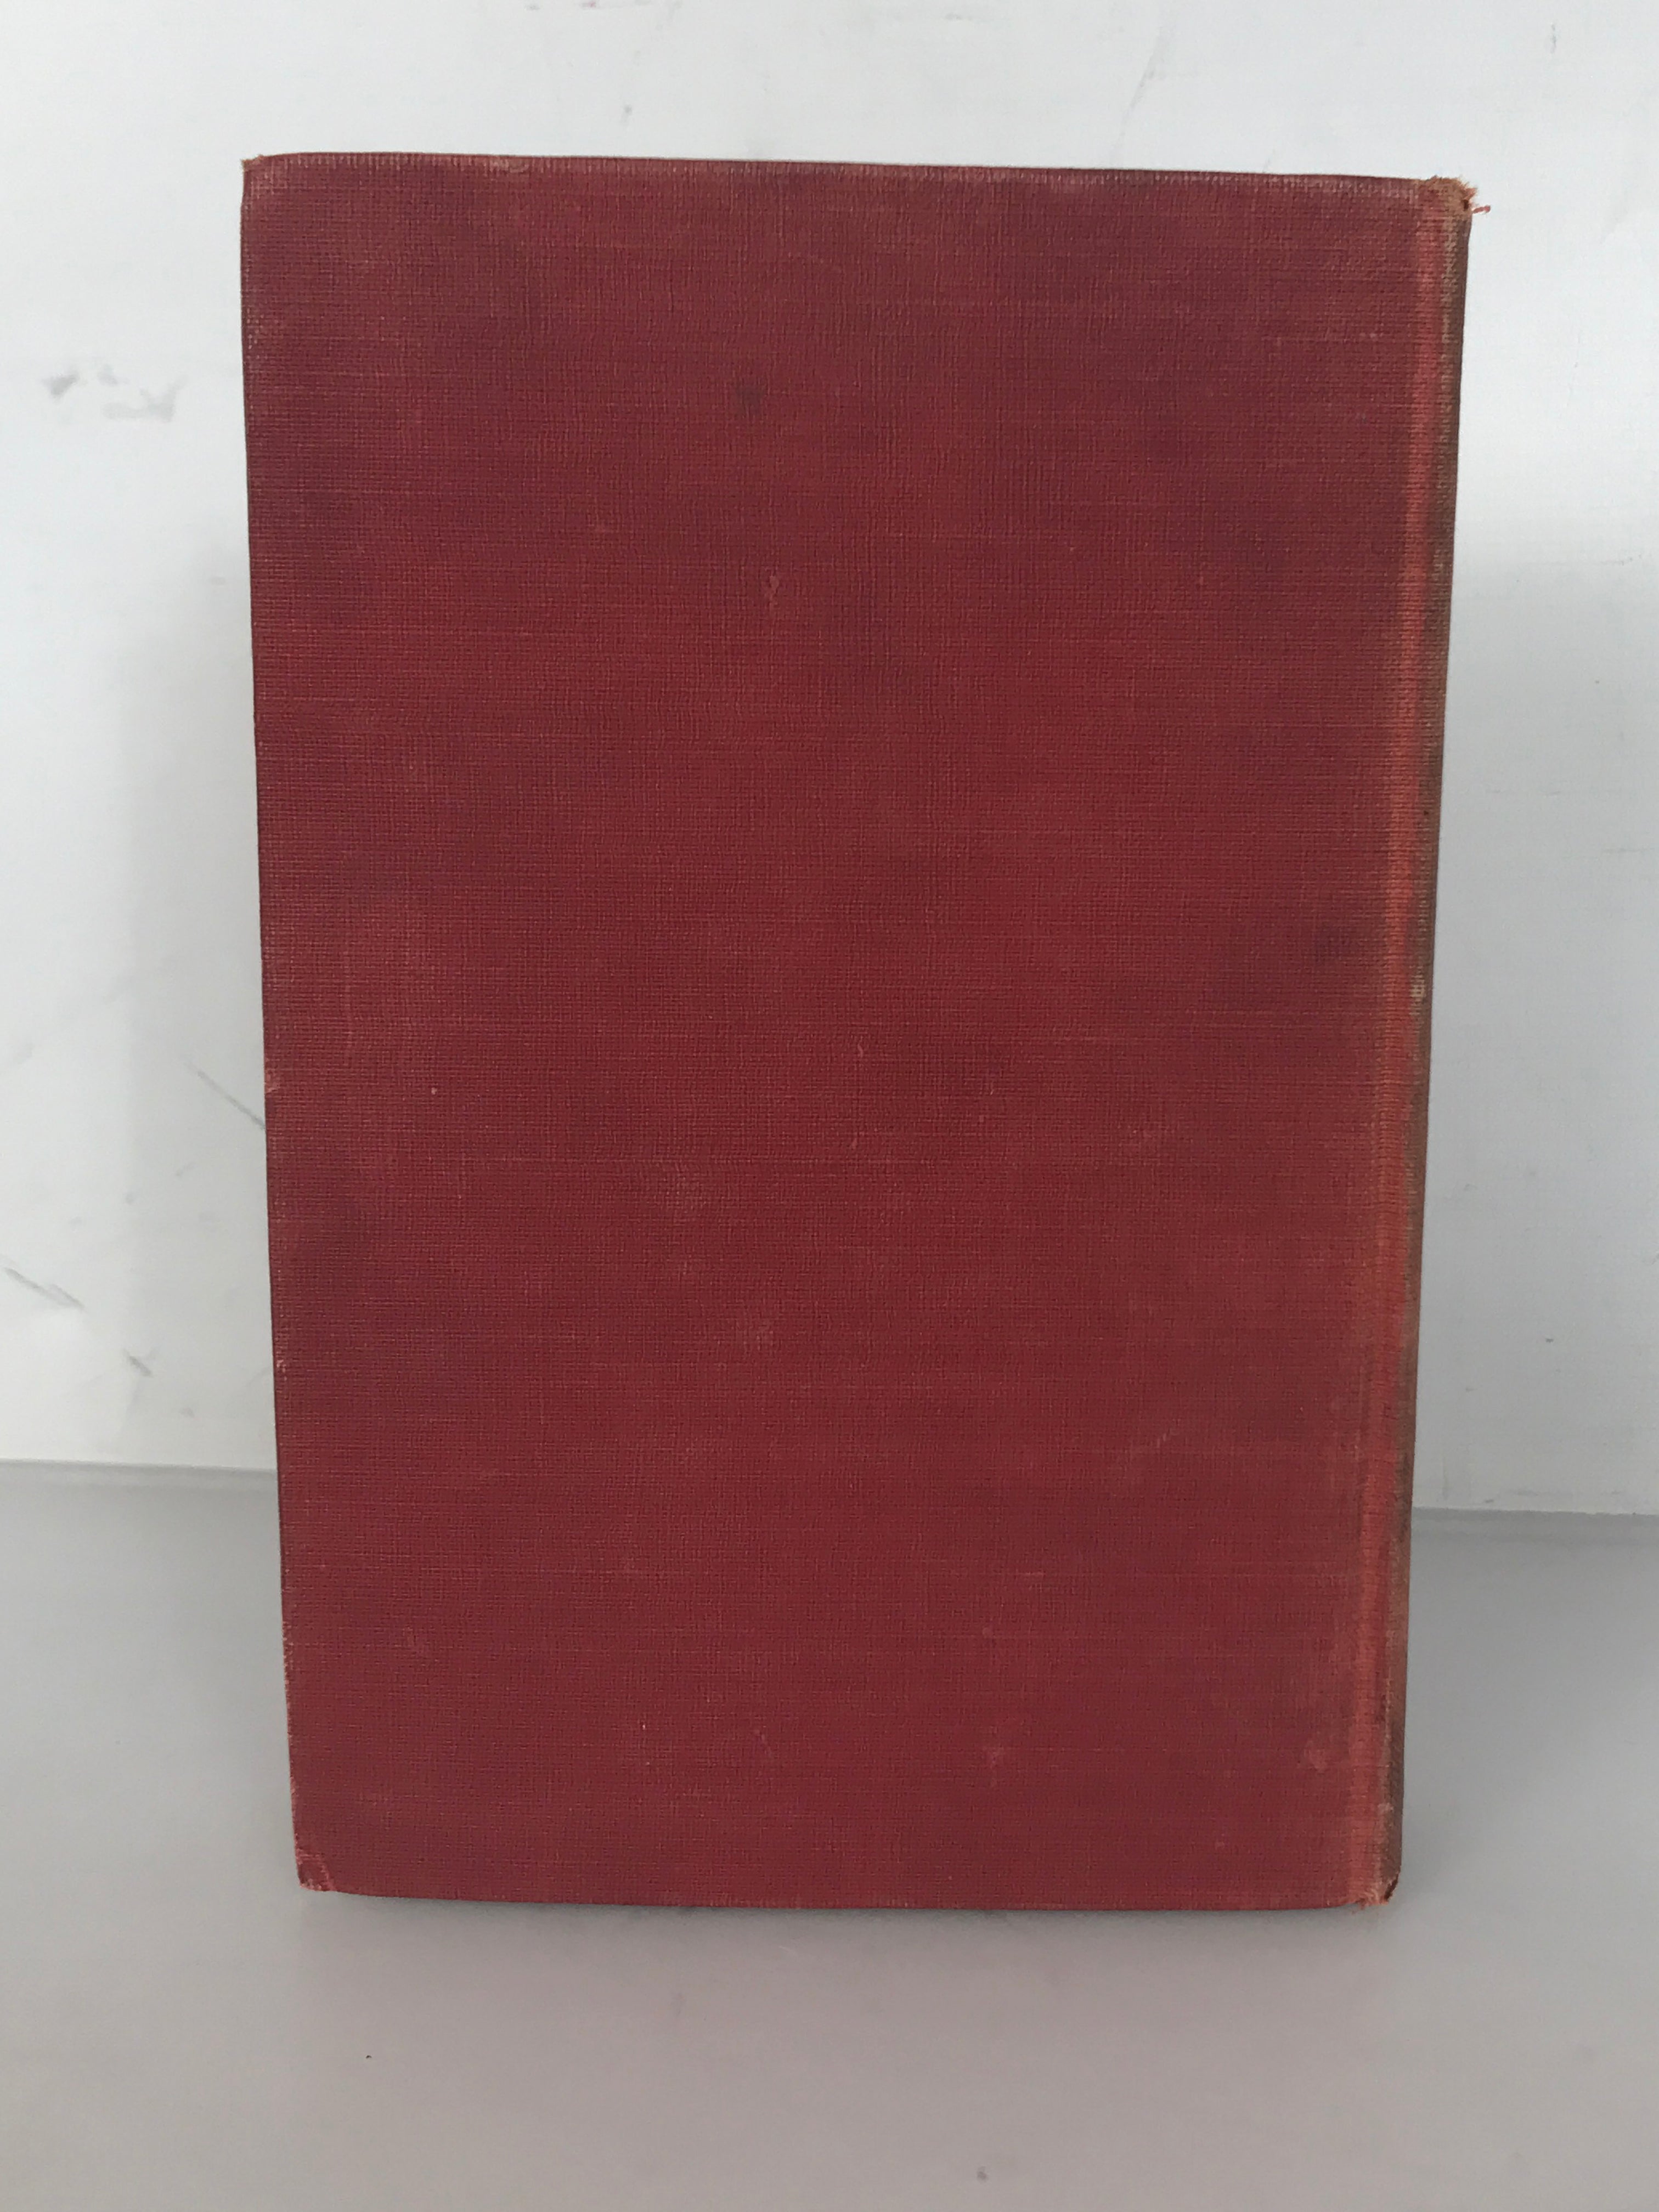 Pastels in Prose From the French Translated by Stuart Merrill 1890 Harper & Brothers HC Antique